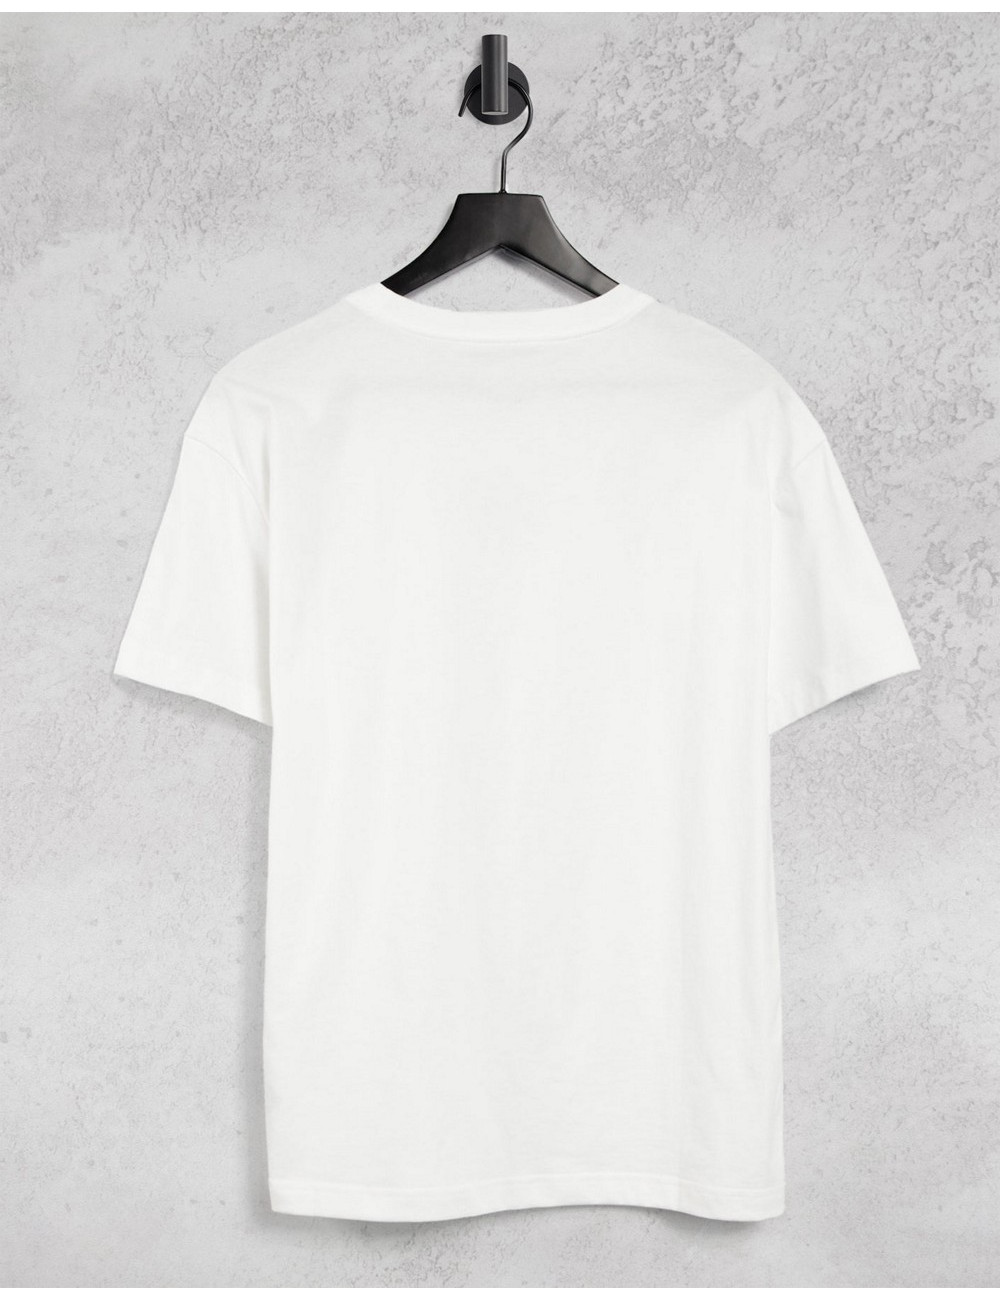 Nike t-shirt in white with...